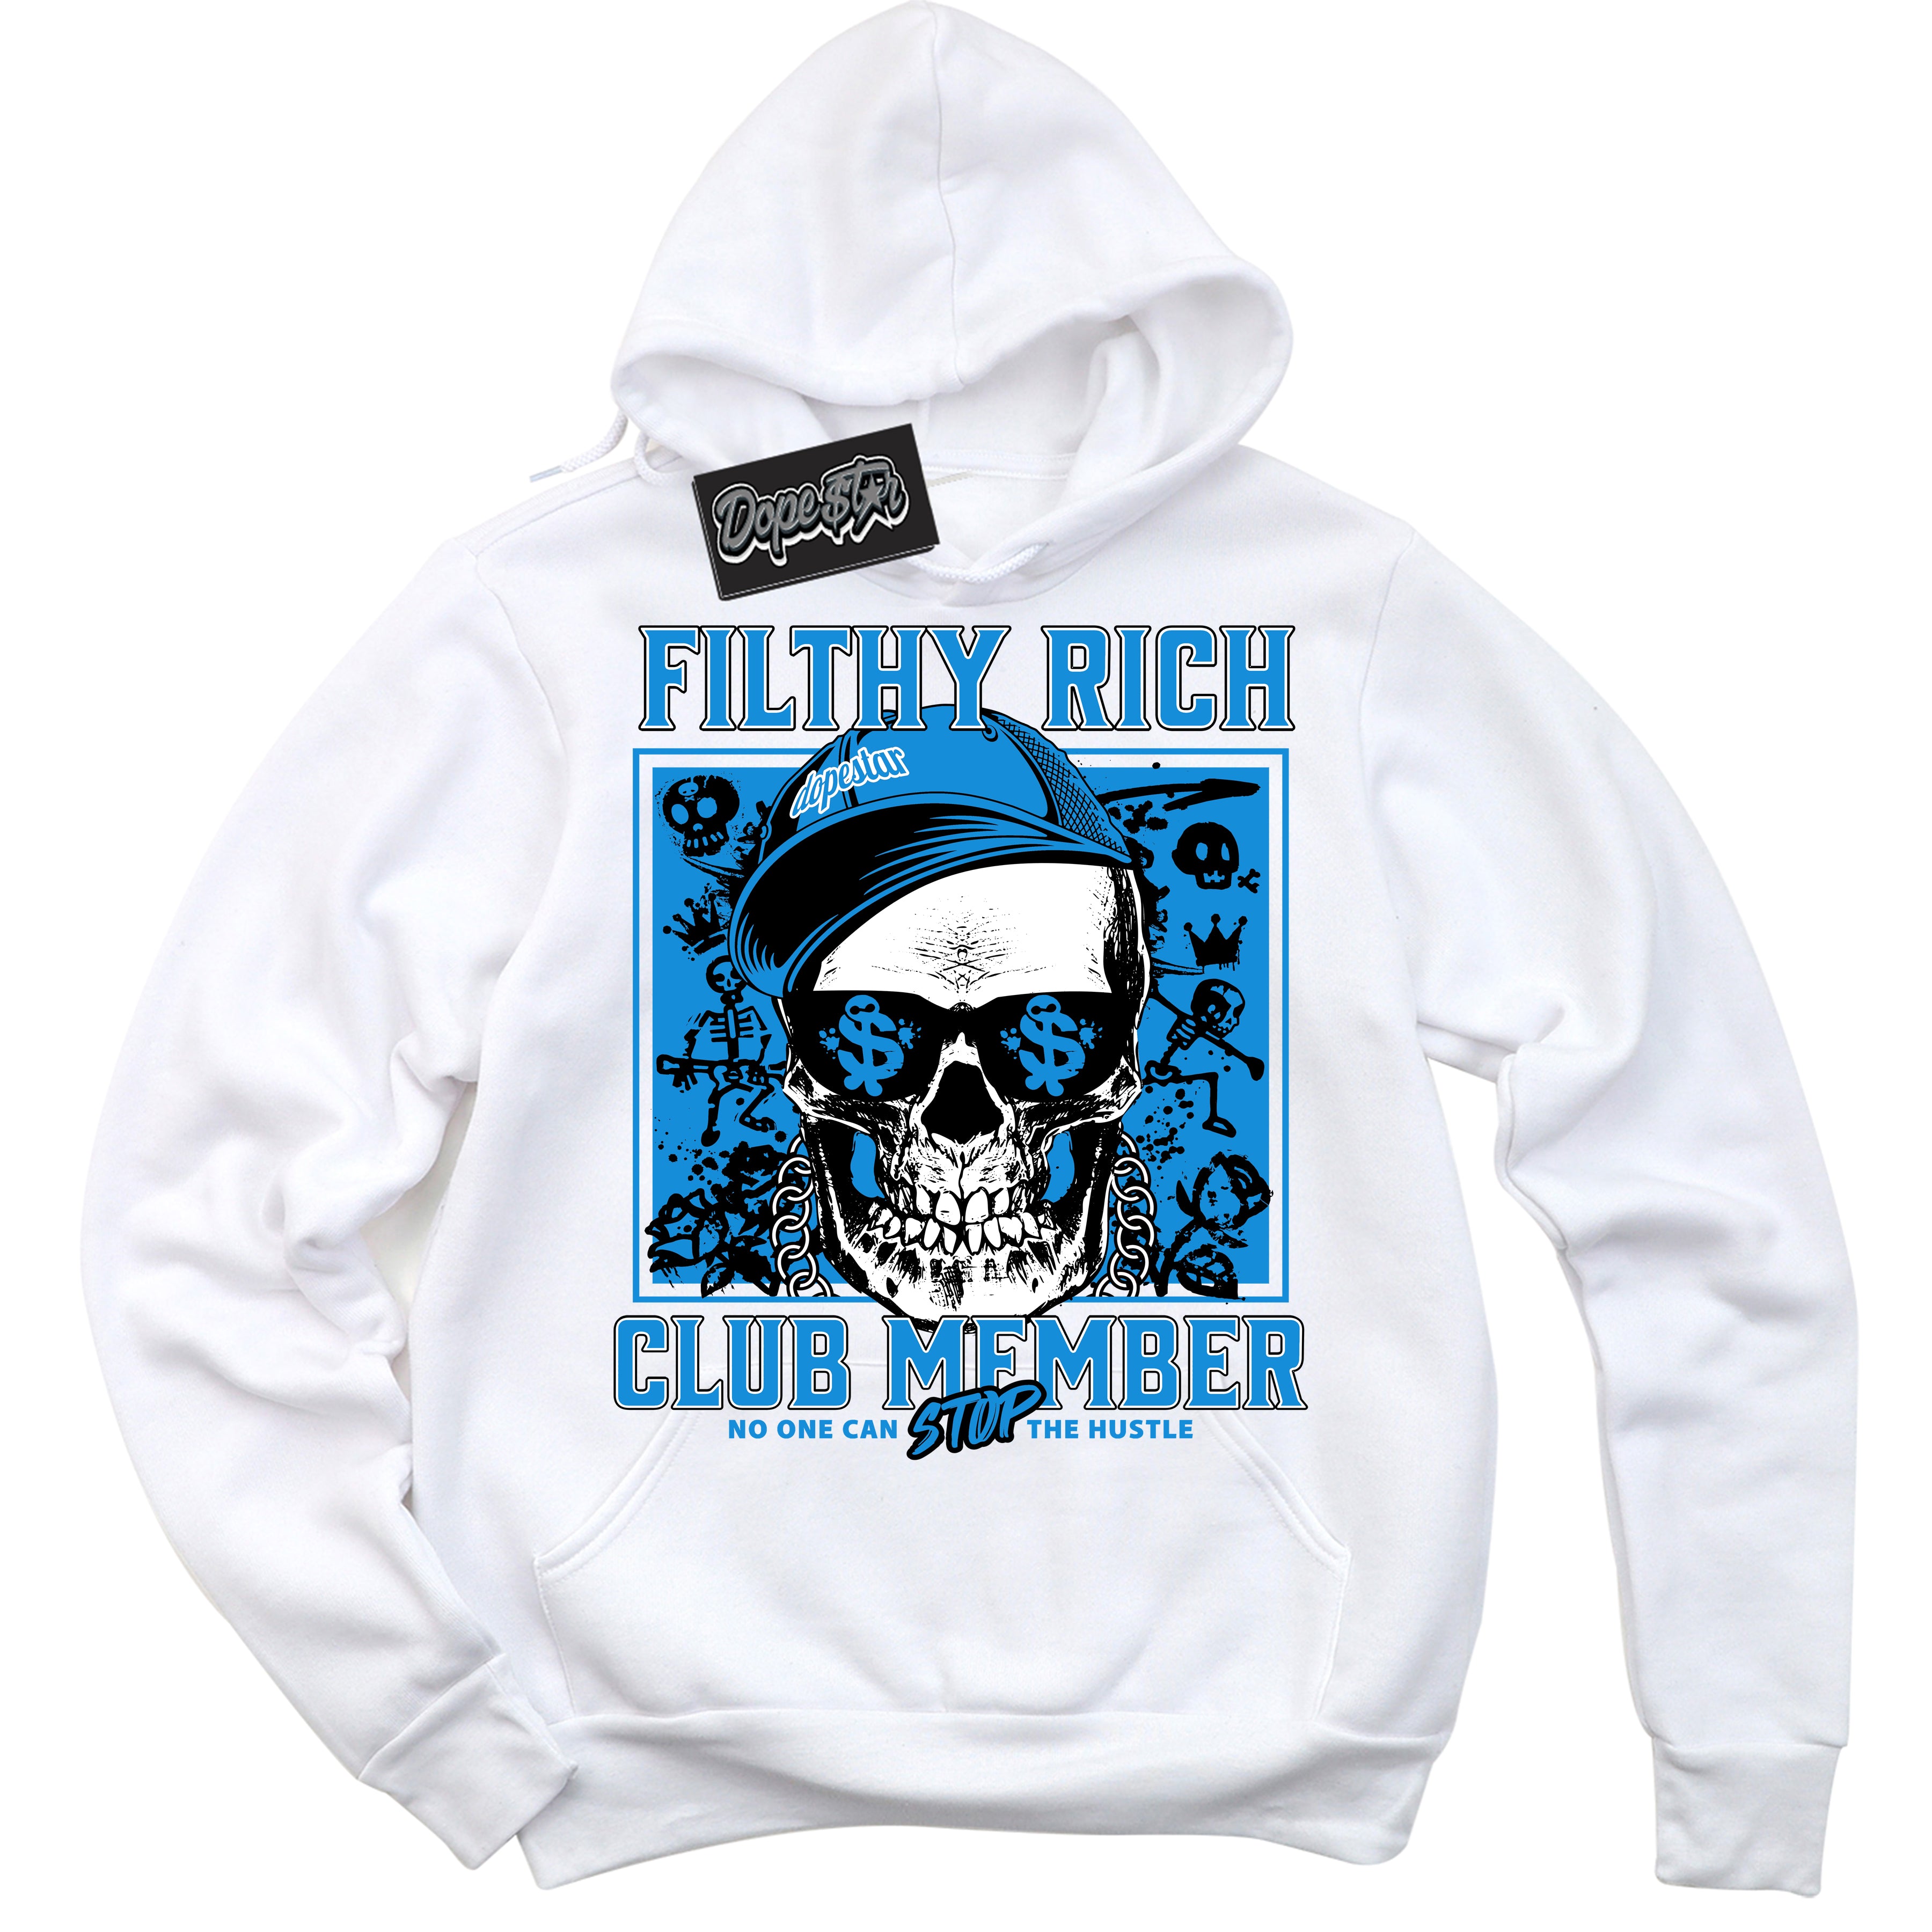 Cool White Hoodie with “ Filthy Rich ”  design that Perfectly Matches Powder Blue 9s Sneakers.